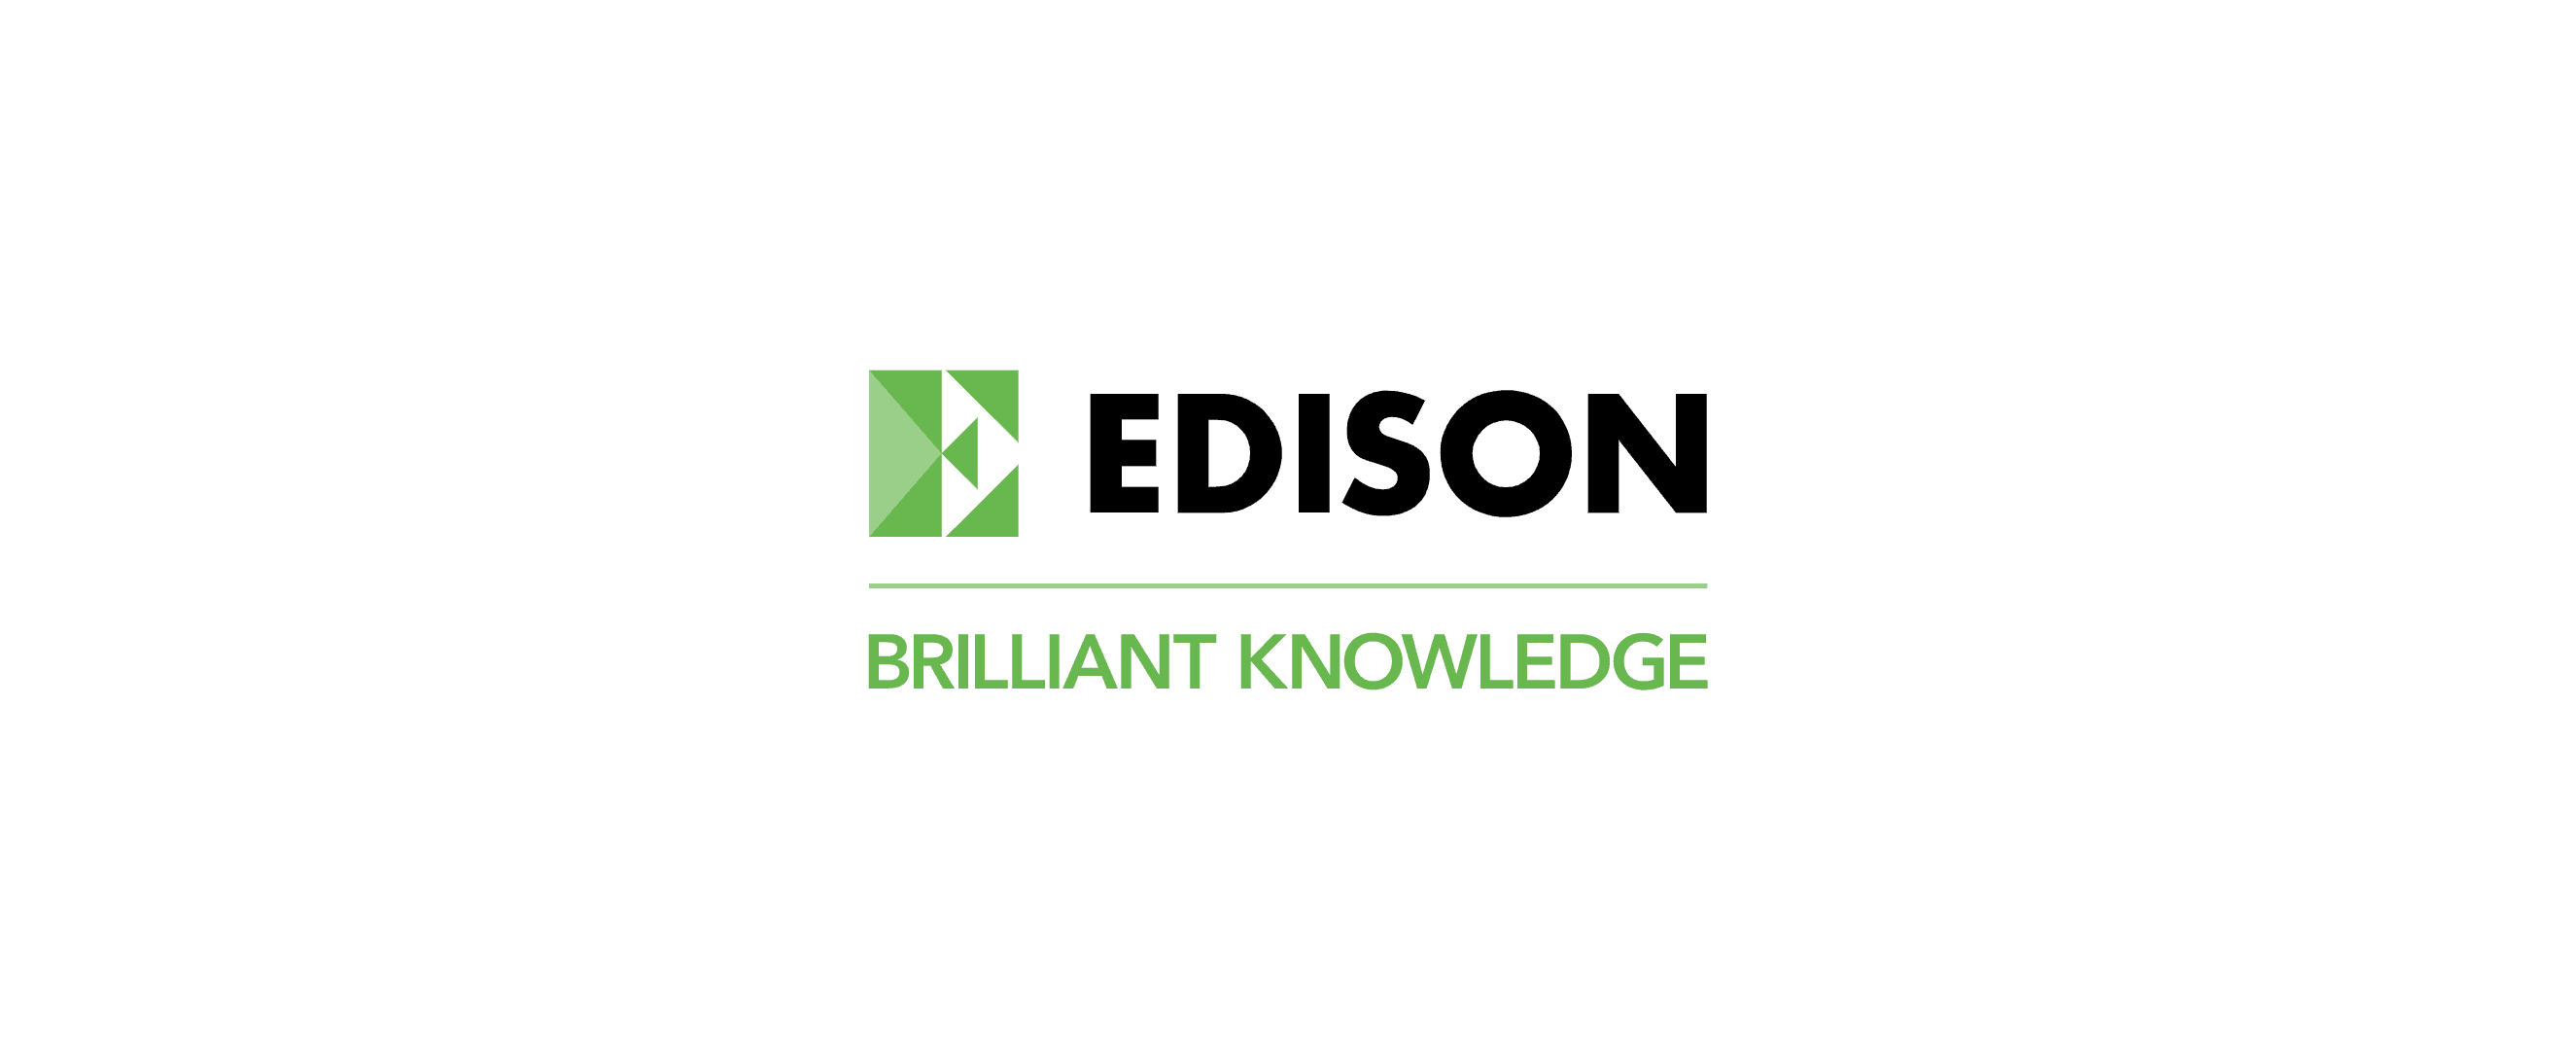 Edison Group Makes Two Senior Appointments to Drive Technology and ESG Expansion